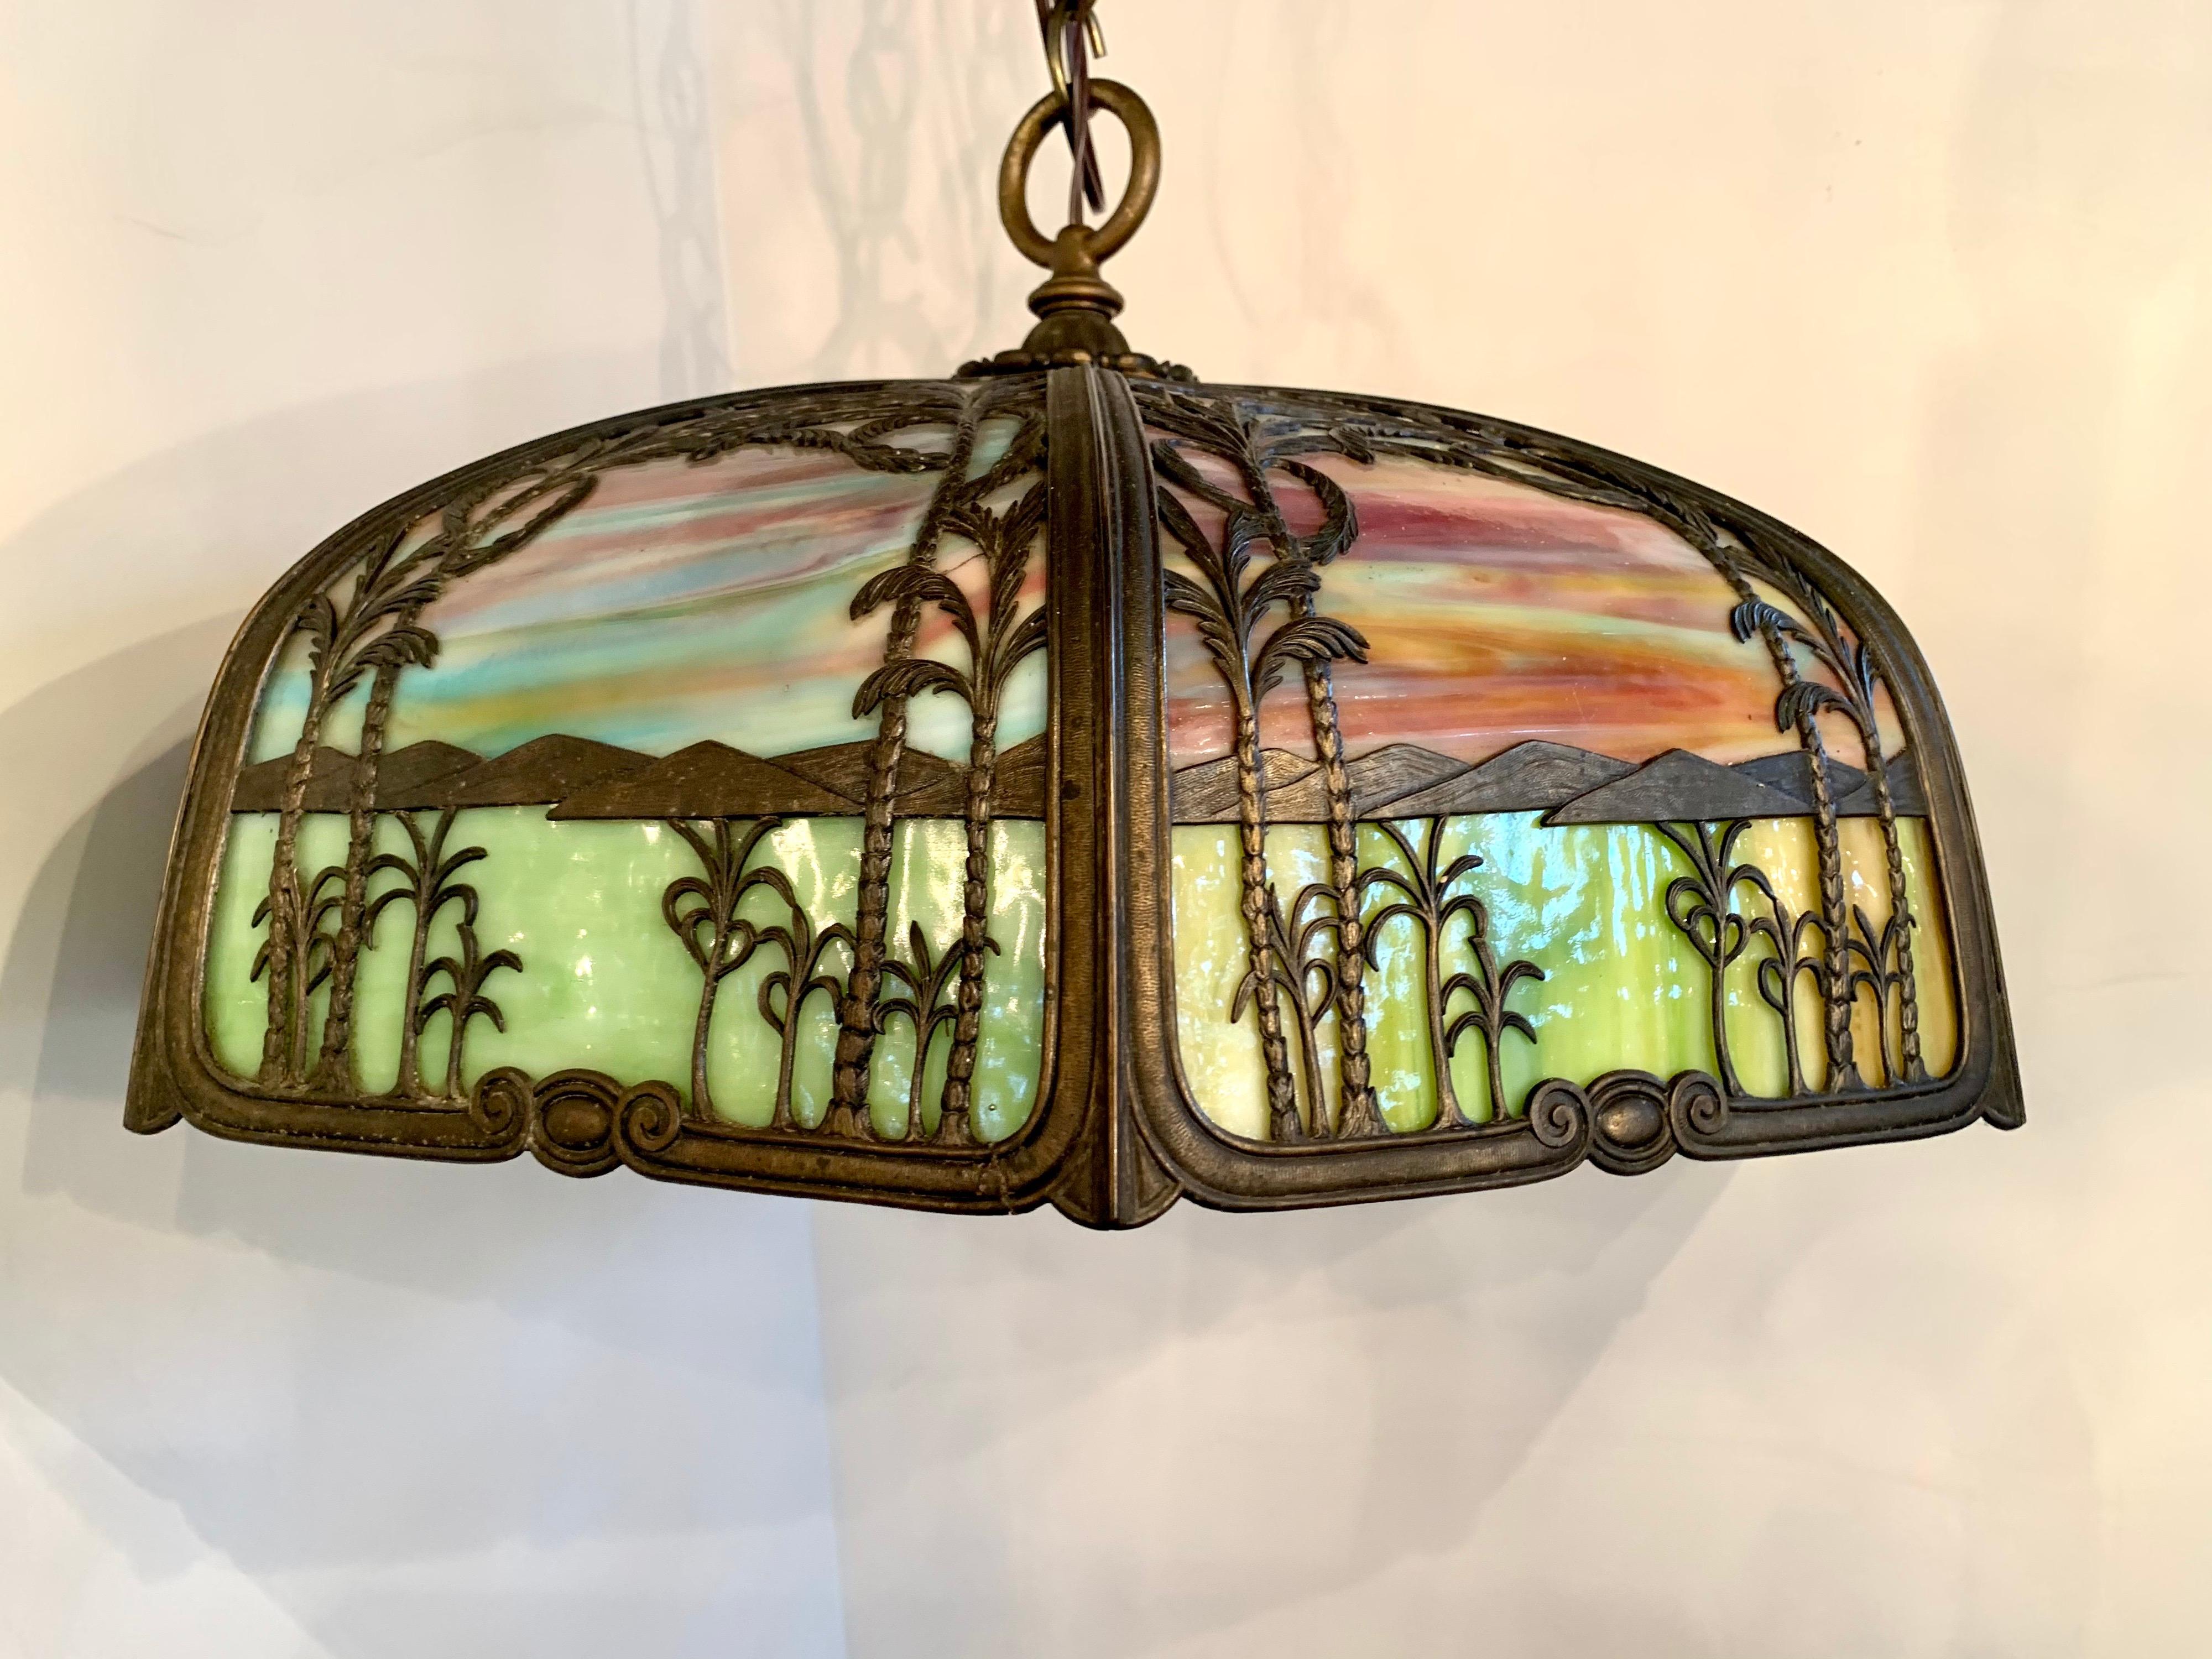 Large Handel hanging lamp, manufactured in Meriden CT, features eight panels with brass overlay depicting palm trees and lush foliage against a multicolored stained glass background that represents a sunset. Wired for four bulbs. Comes with 20